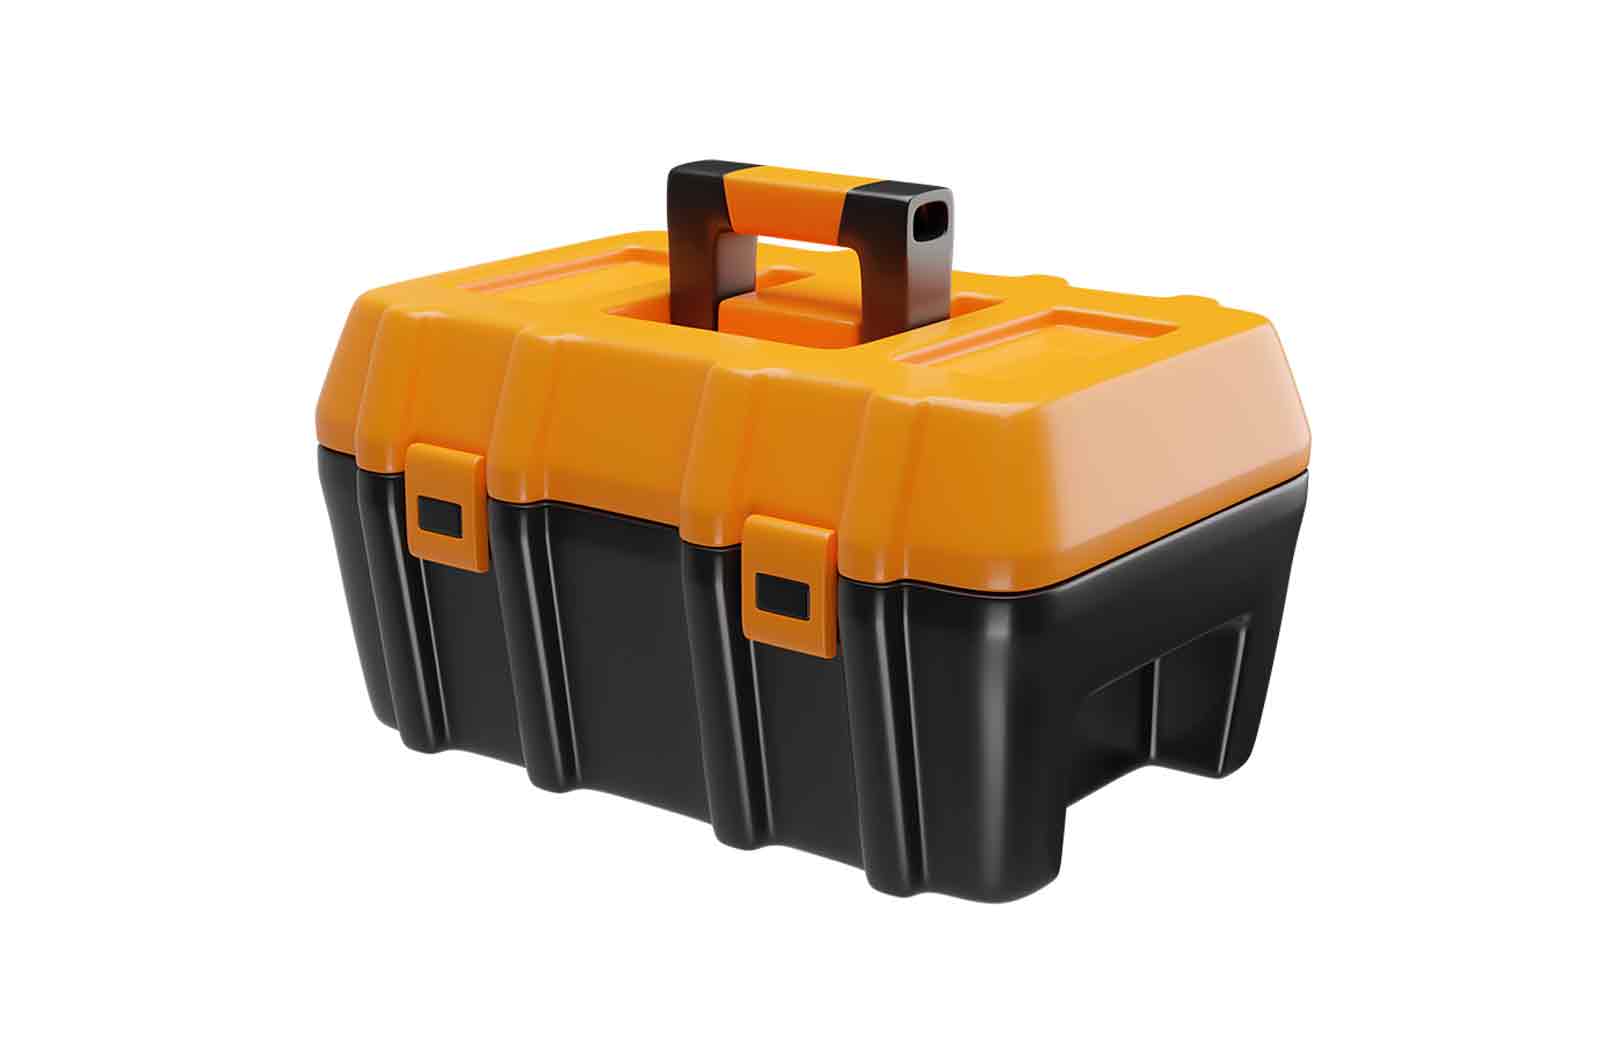 Black and orange tool box, 3d rendered illustration. A portable container for storing or carrying various tools and accessories.